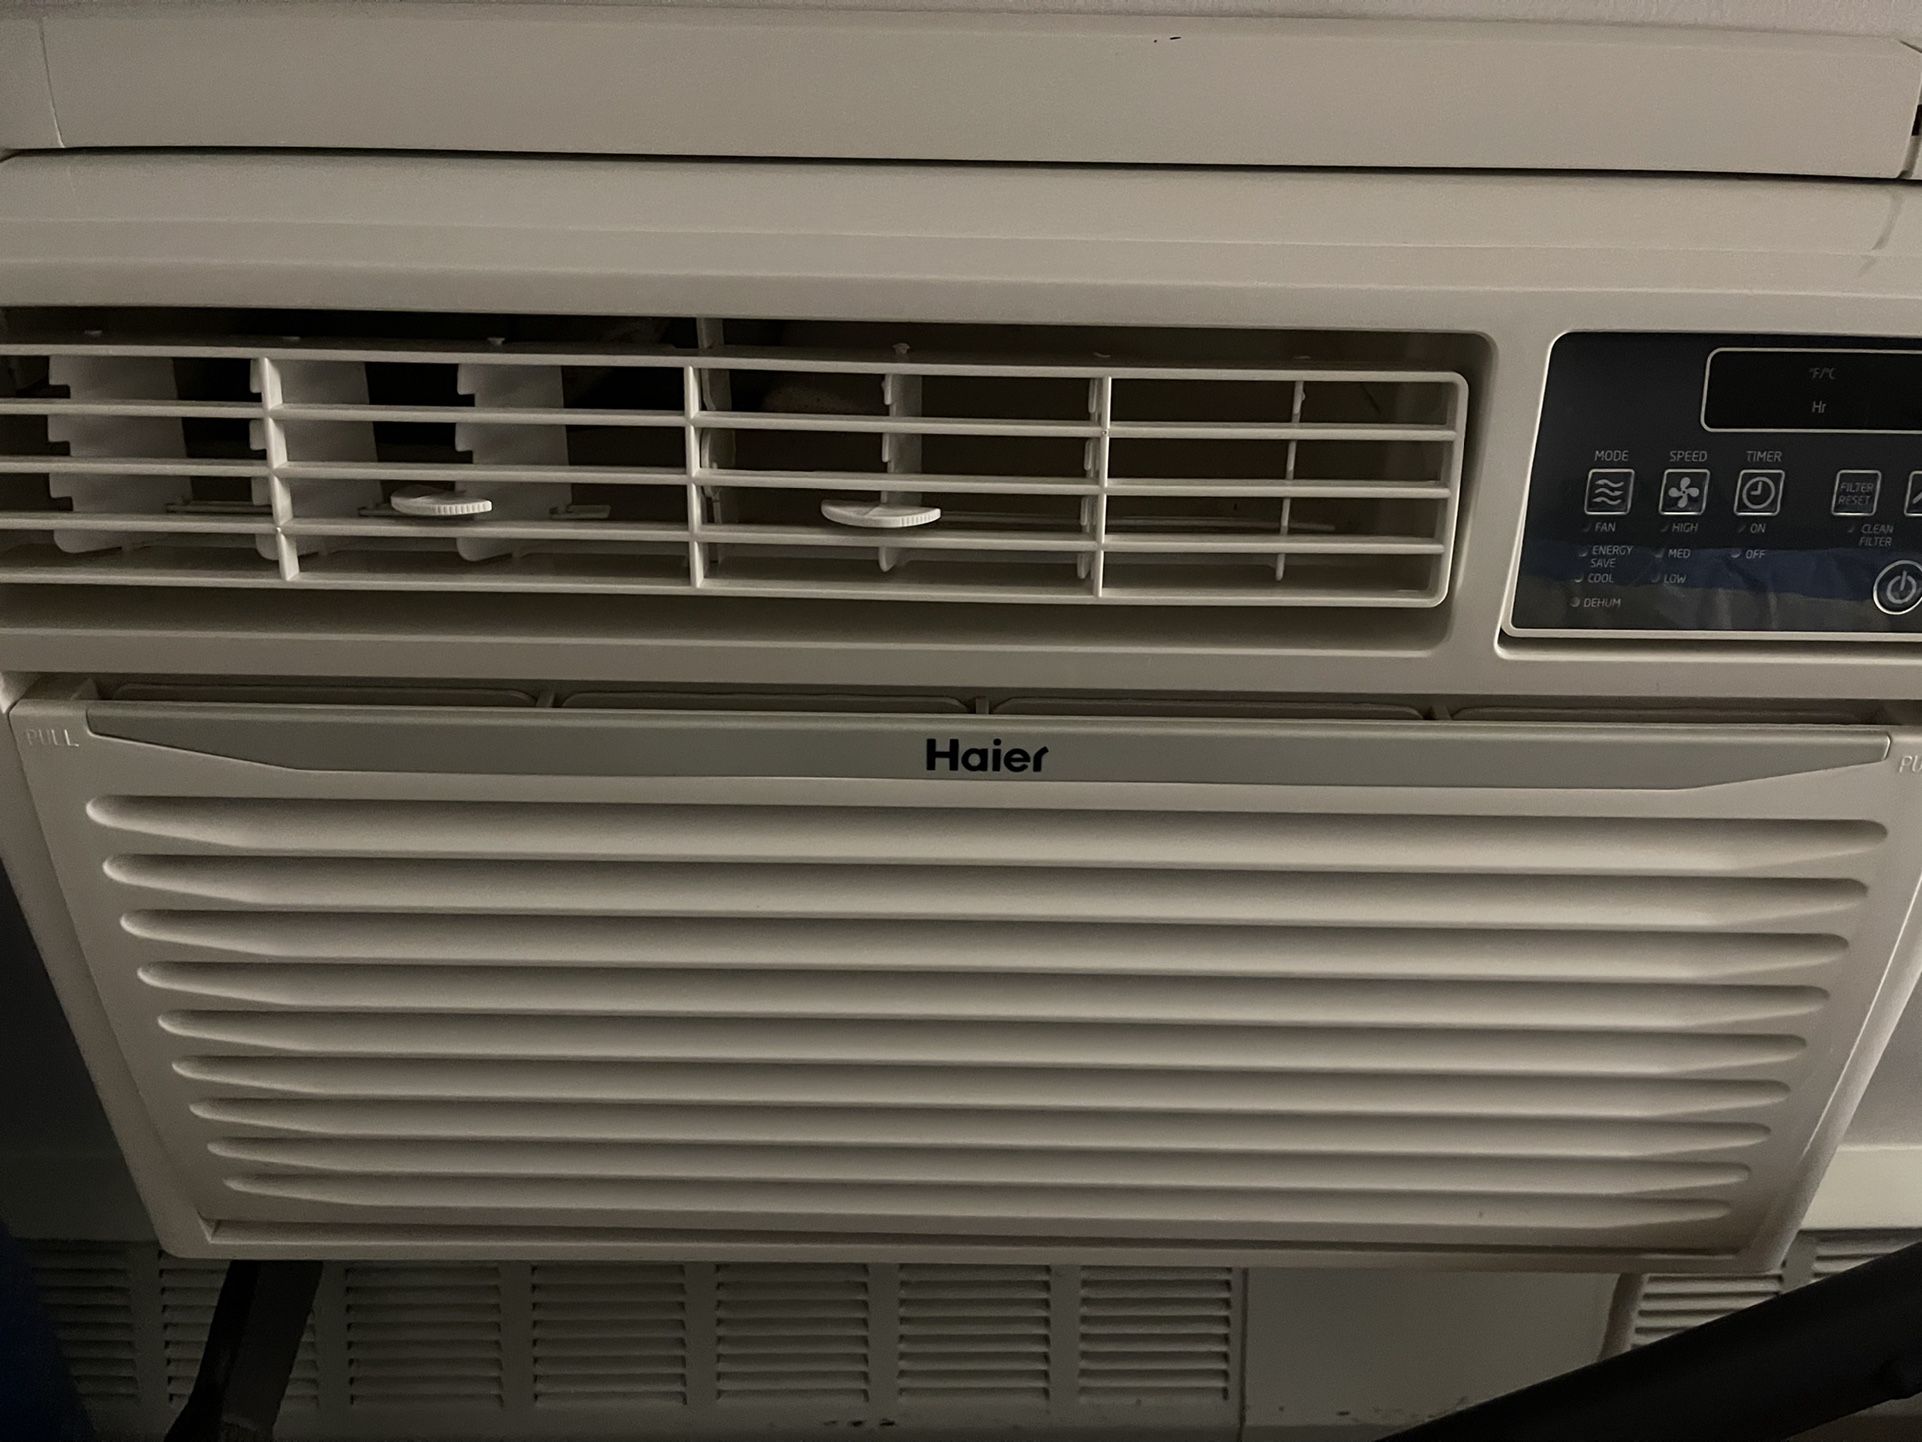 Haier 12,000 BTU IN WALL AC BRAND NEW IN THE BOX NEED OUT ASAP